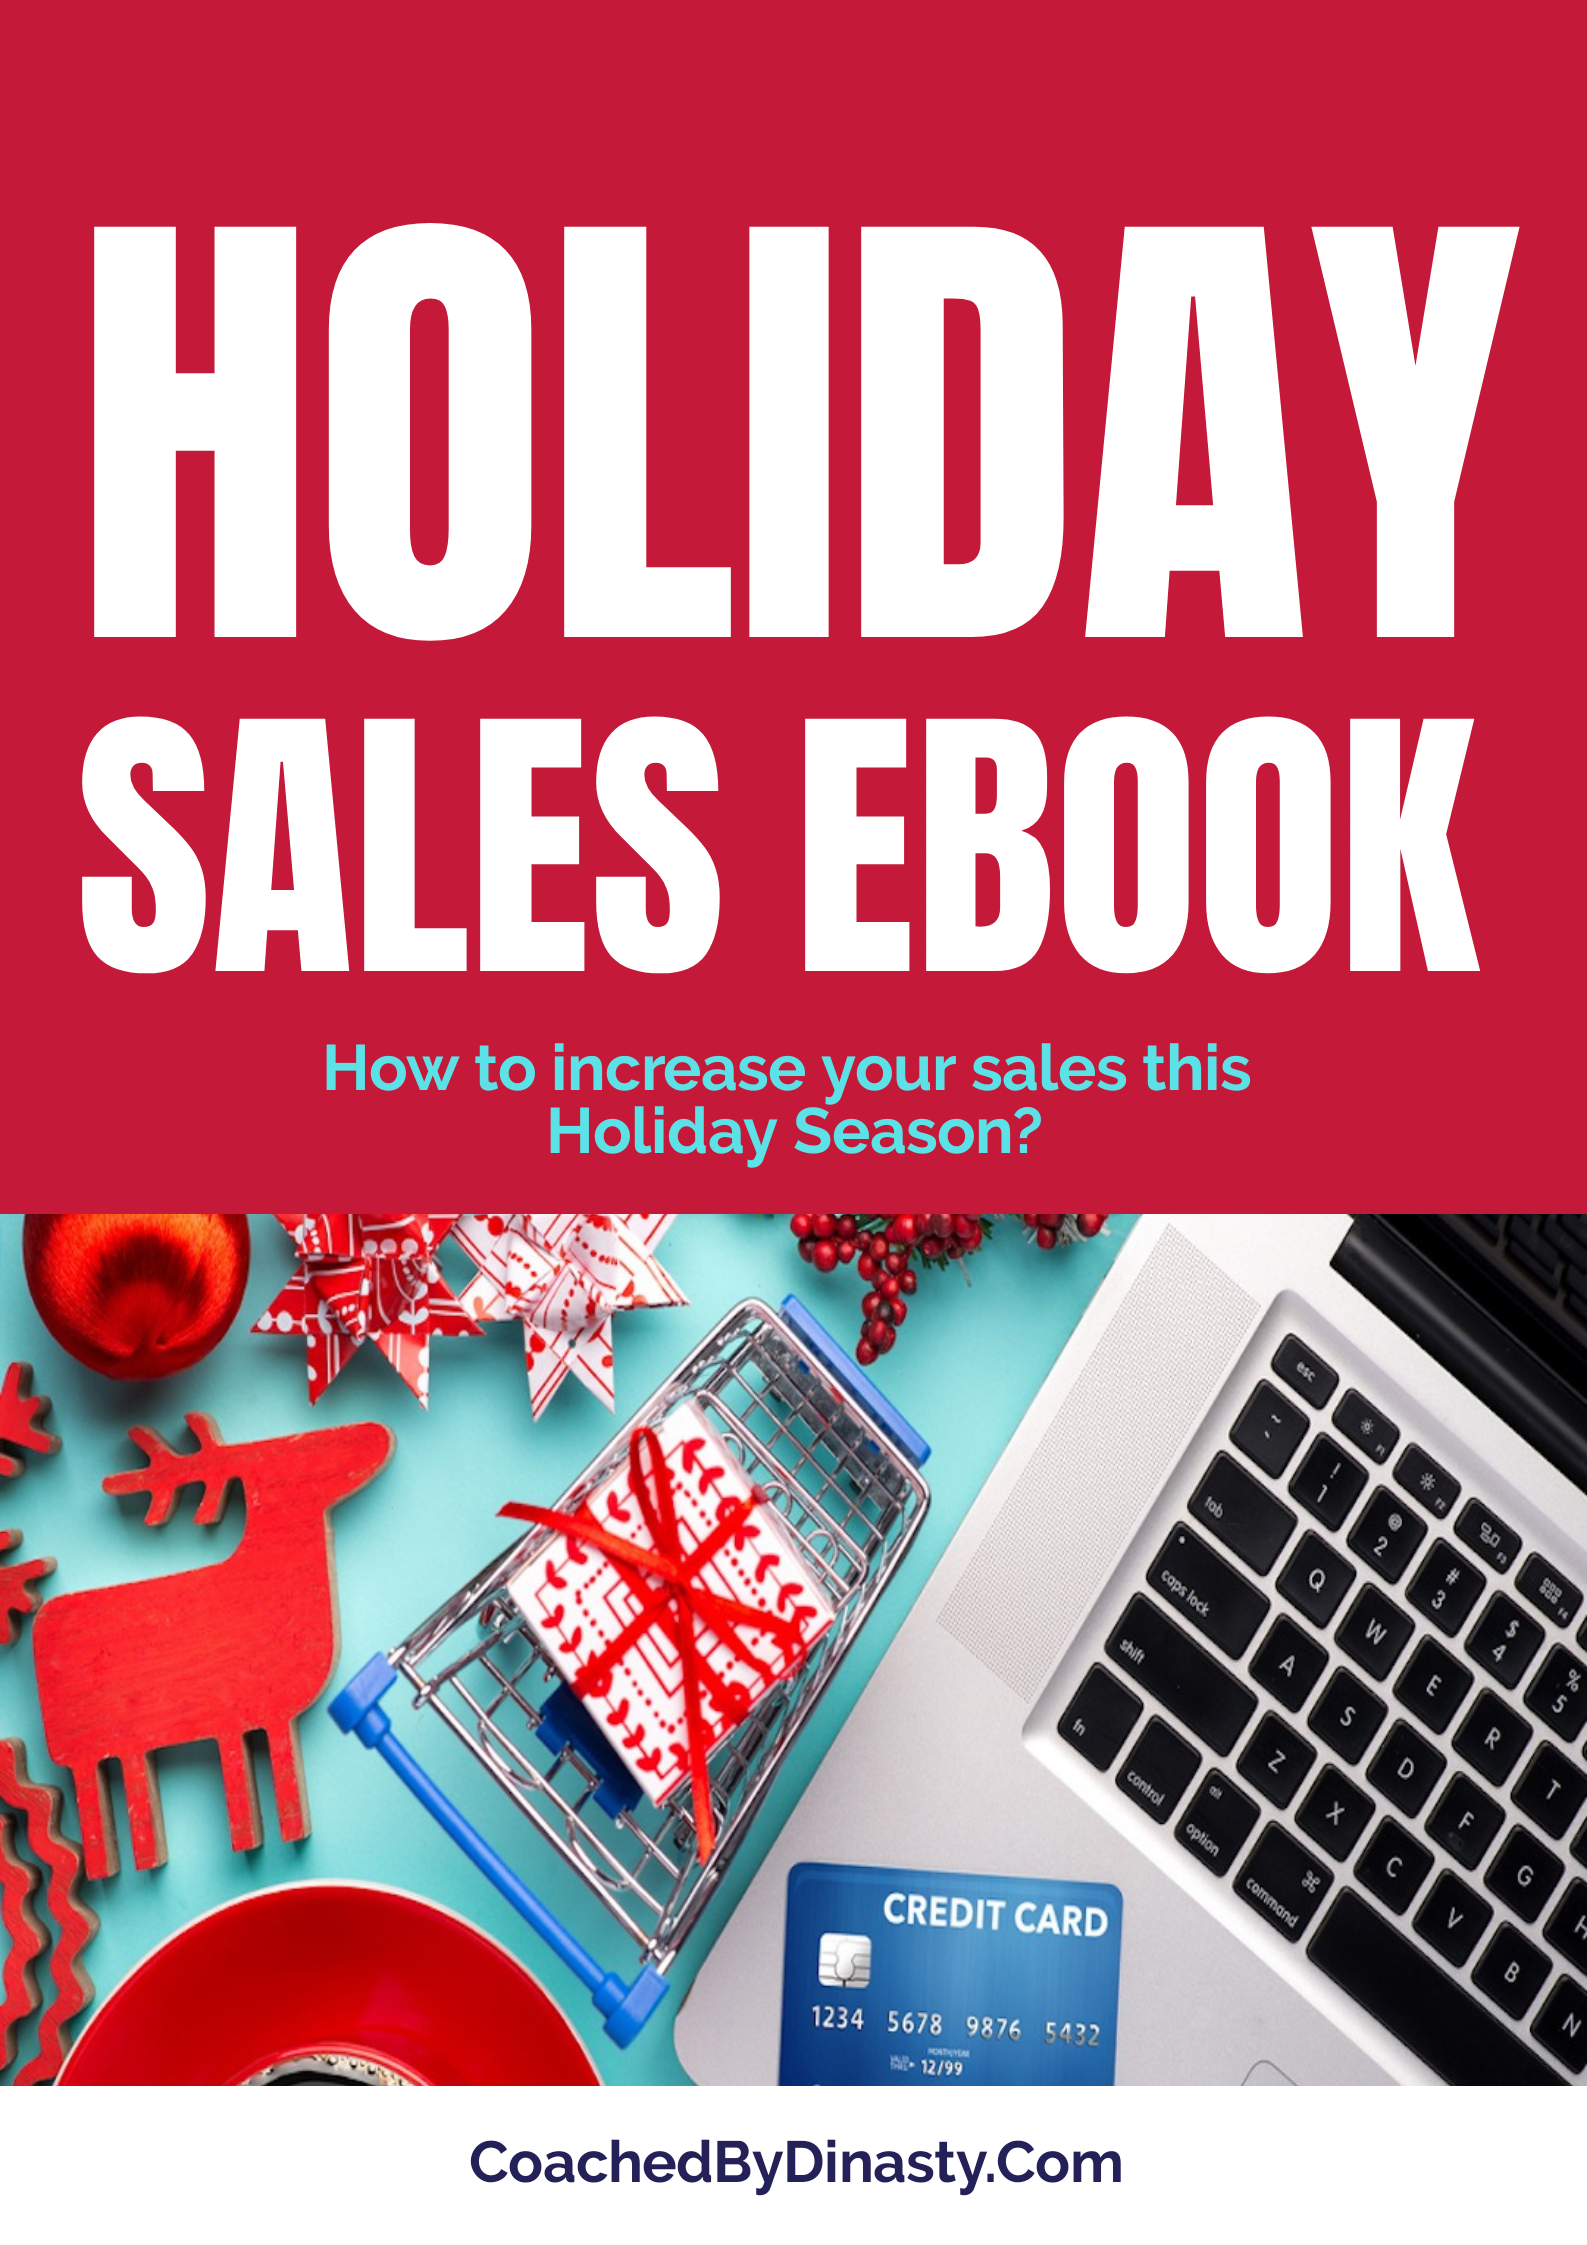 Holiday Sales Book